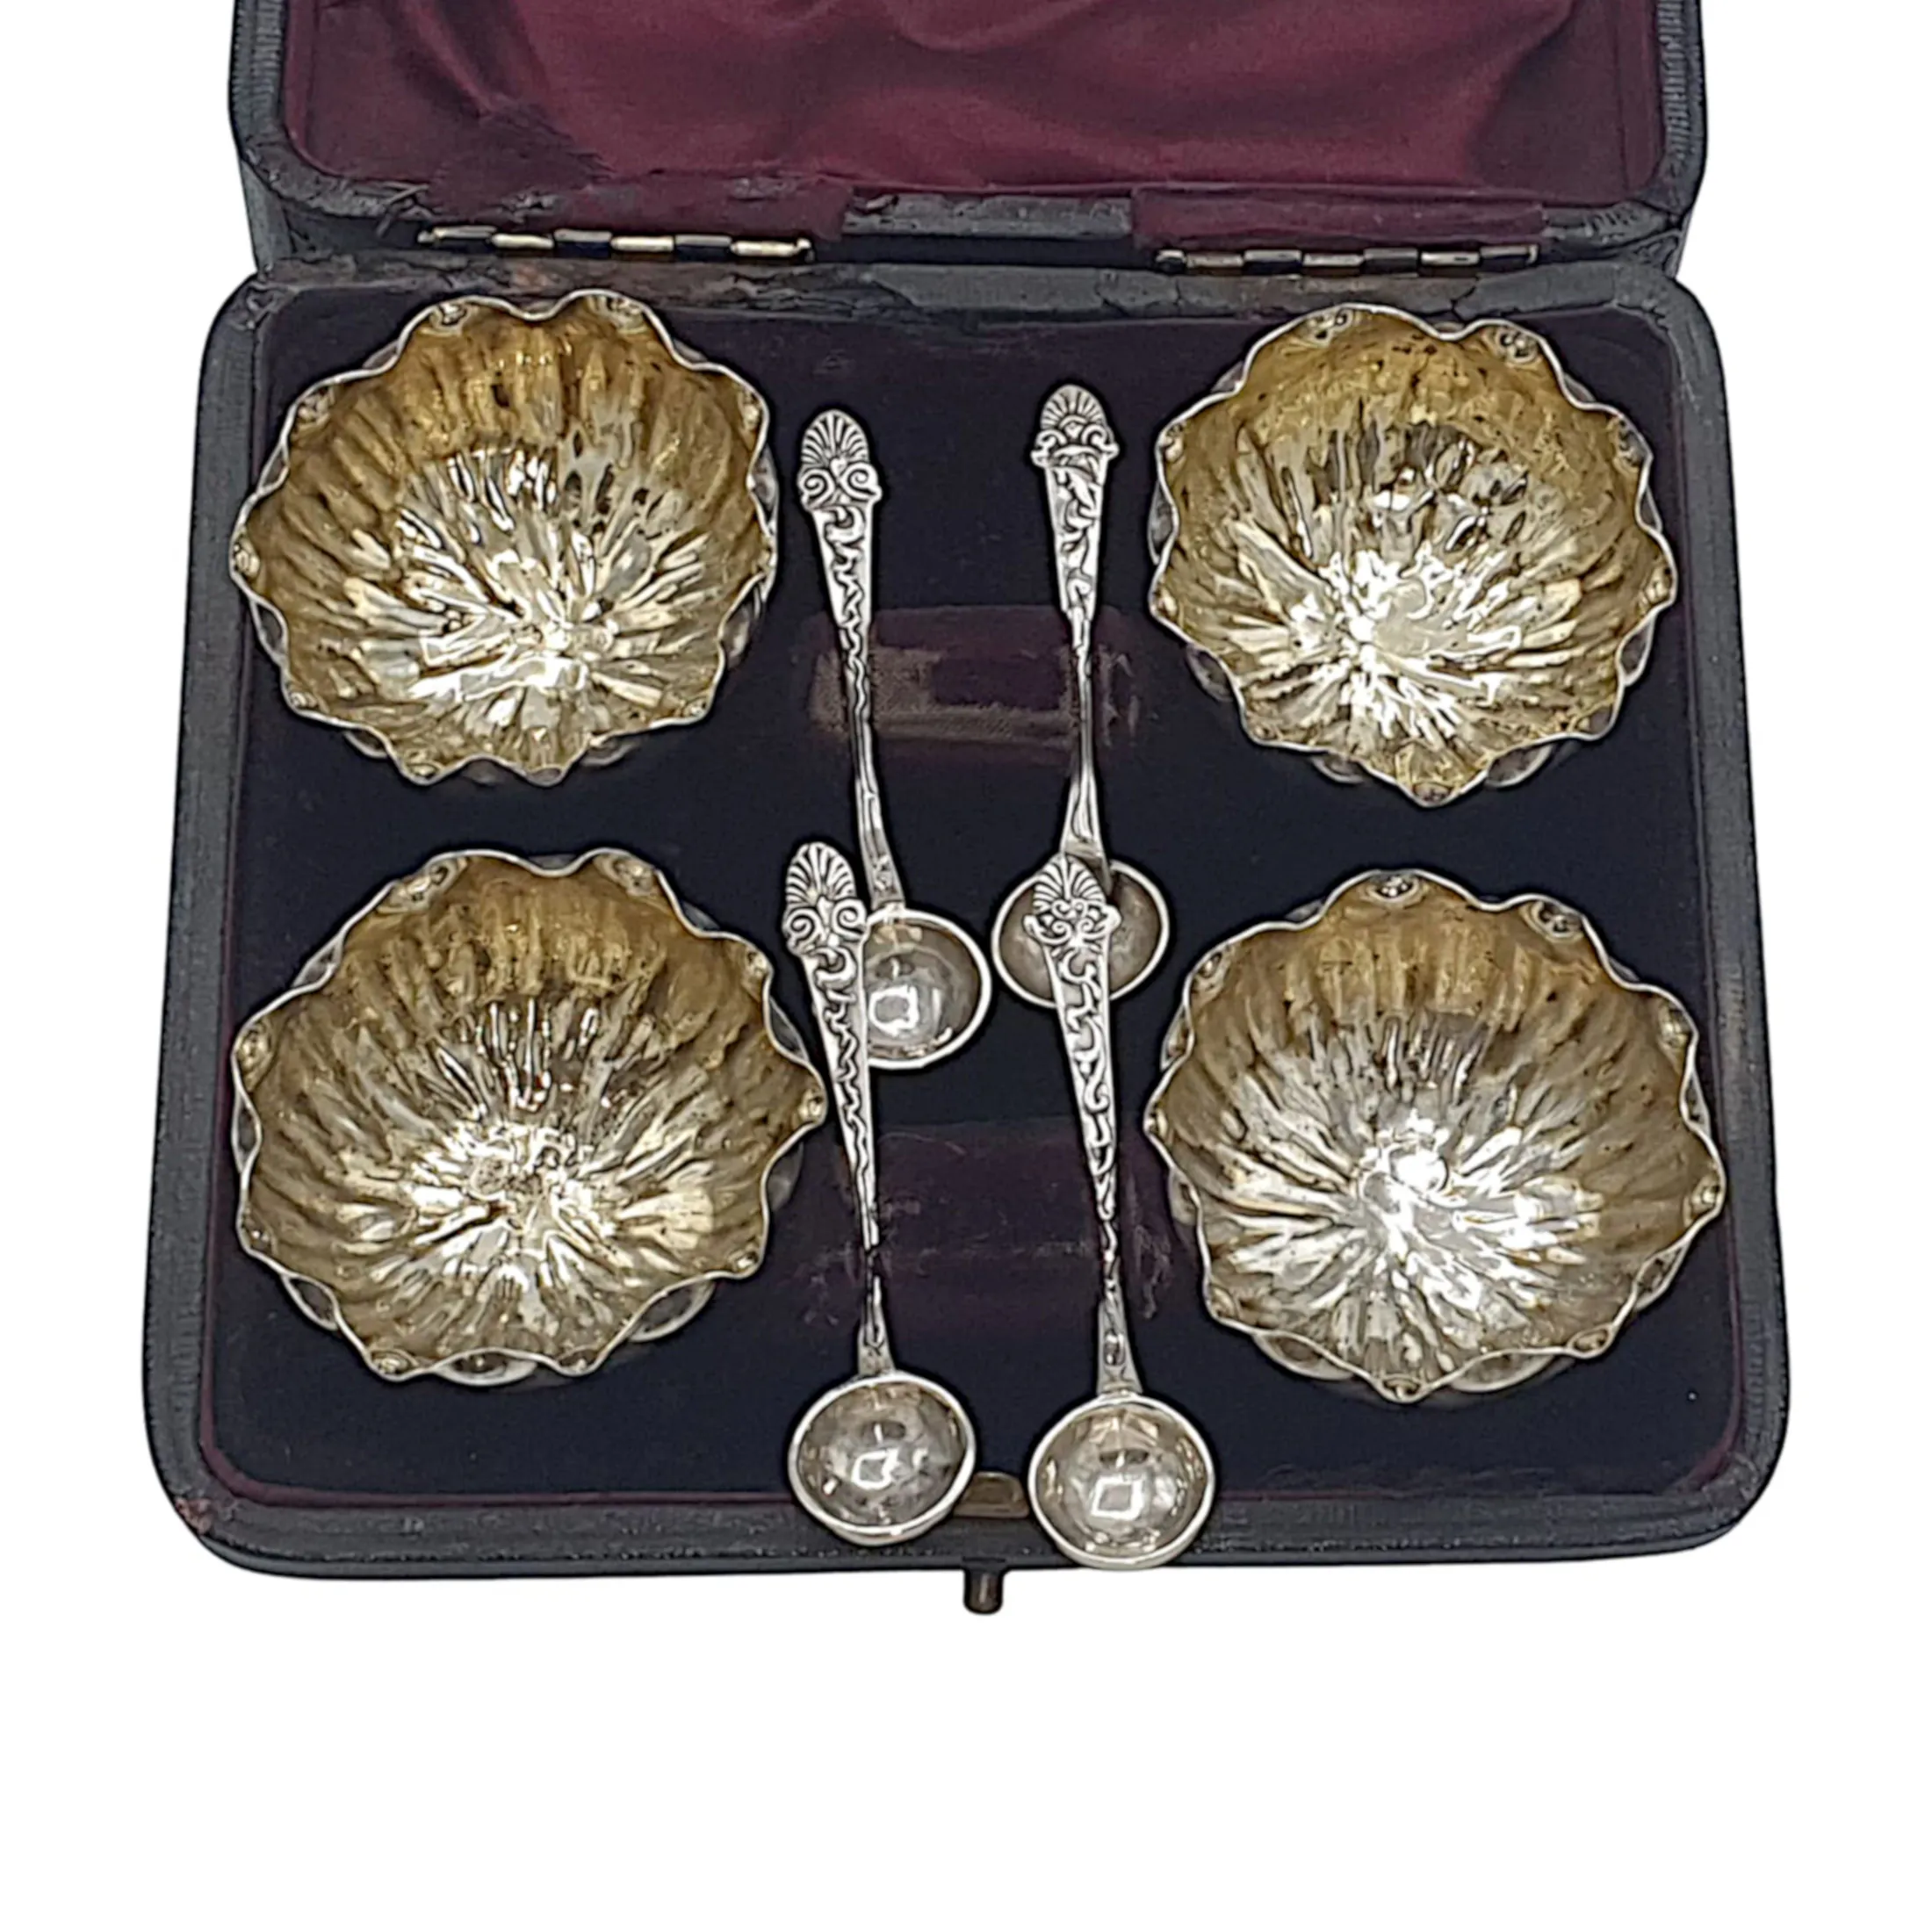 An Elegant Early 20th Century Sterling Silver Set of Salts and Spoons